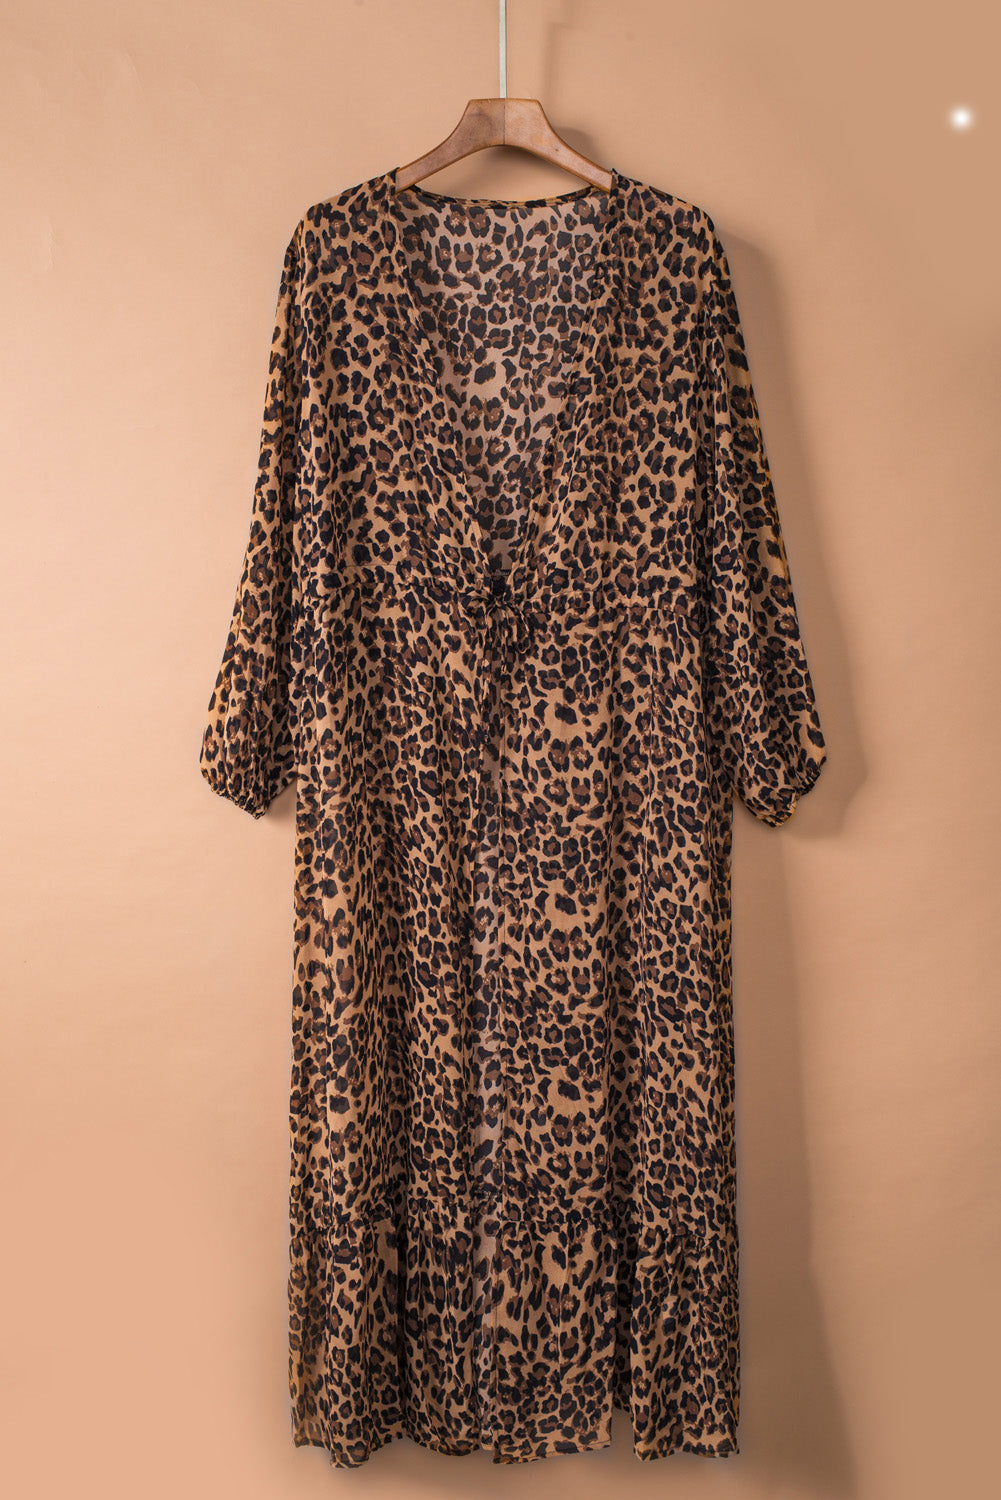 Leopard Open Front Long Sleeve Cover Up